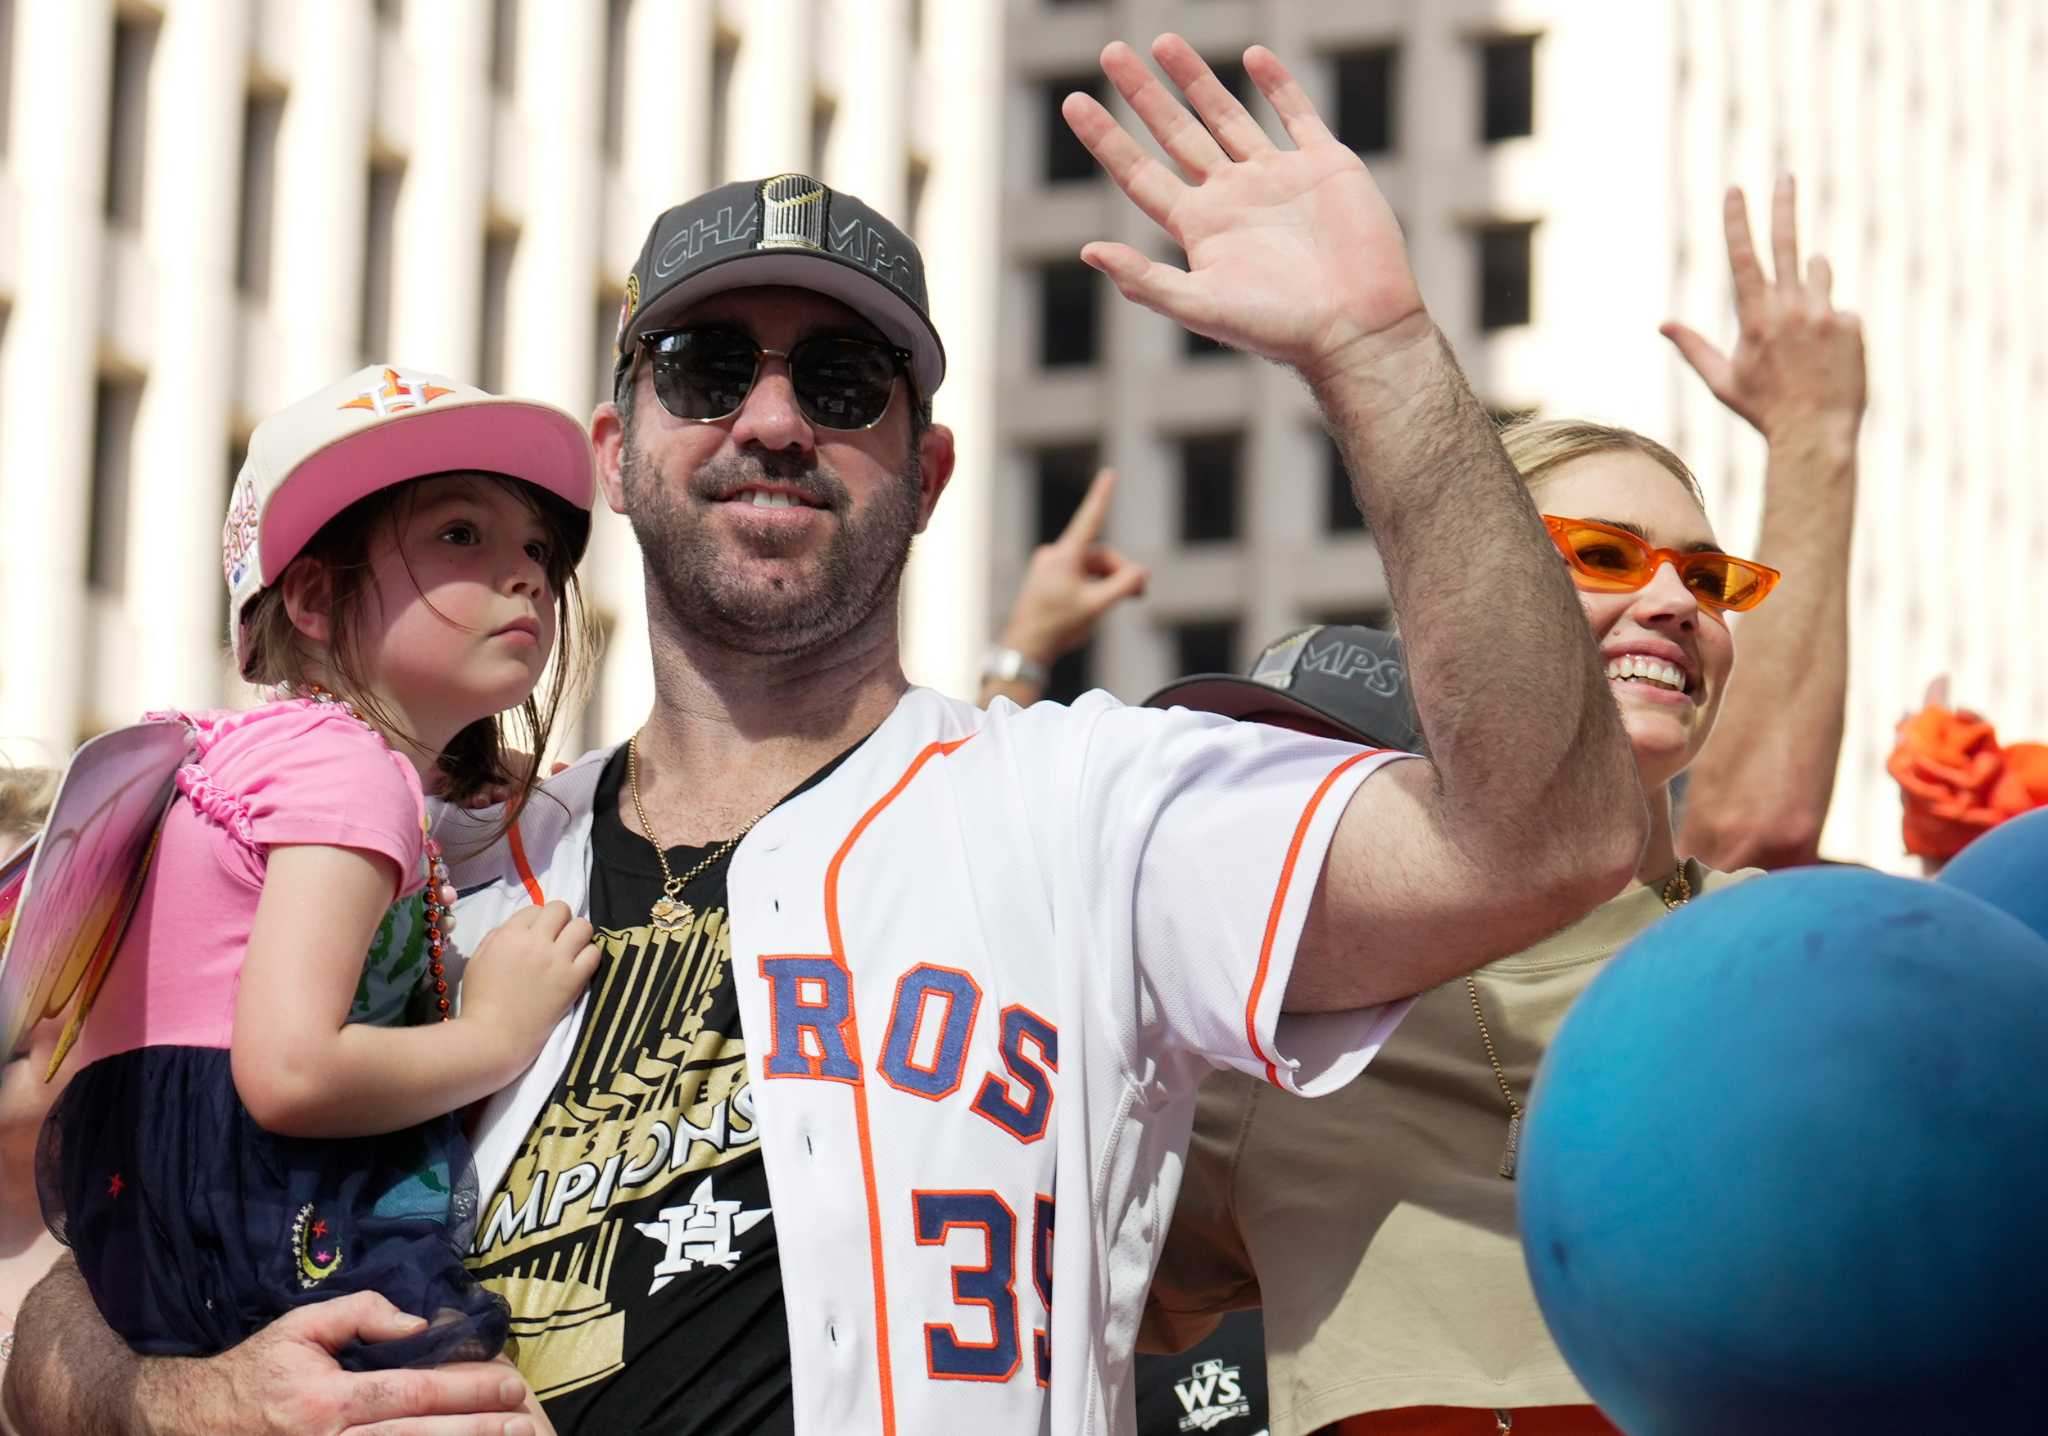 Justin Verlander is skipping the World Series parade to marry Kate